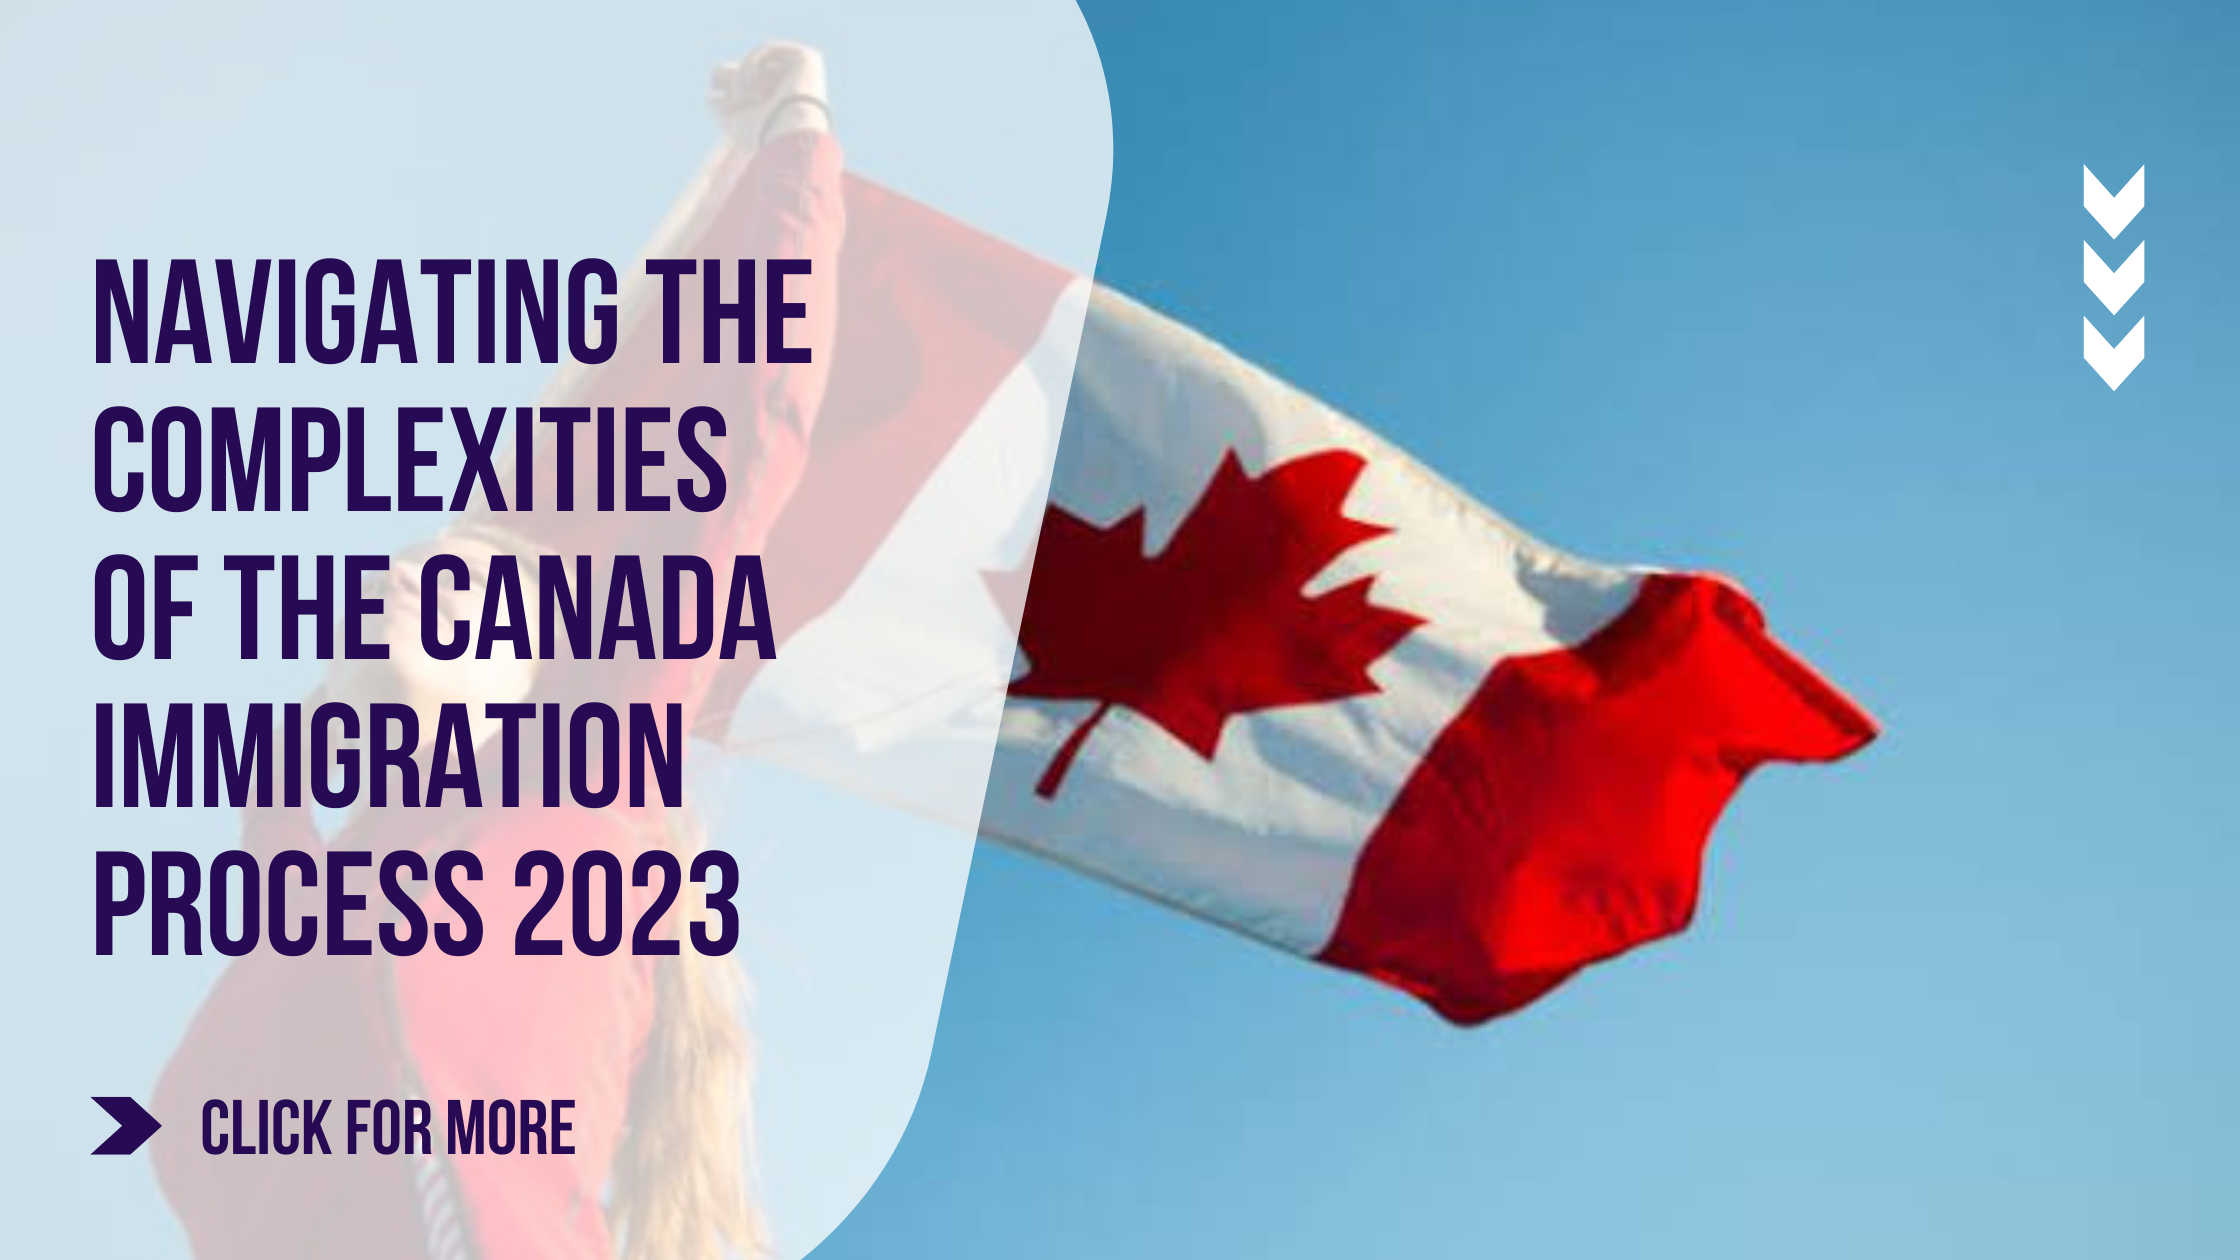 Application Tips for Navigating the Complexities of the Canada Immigration Process 2023